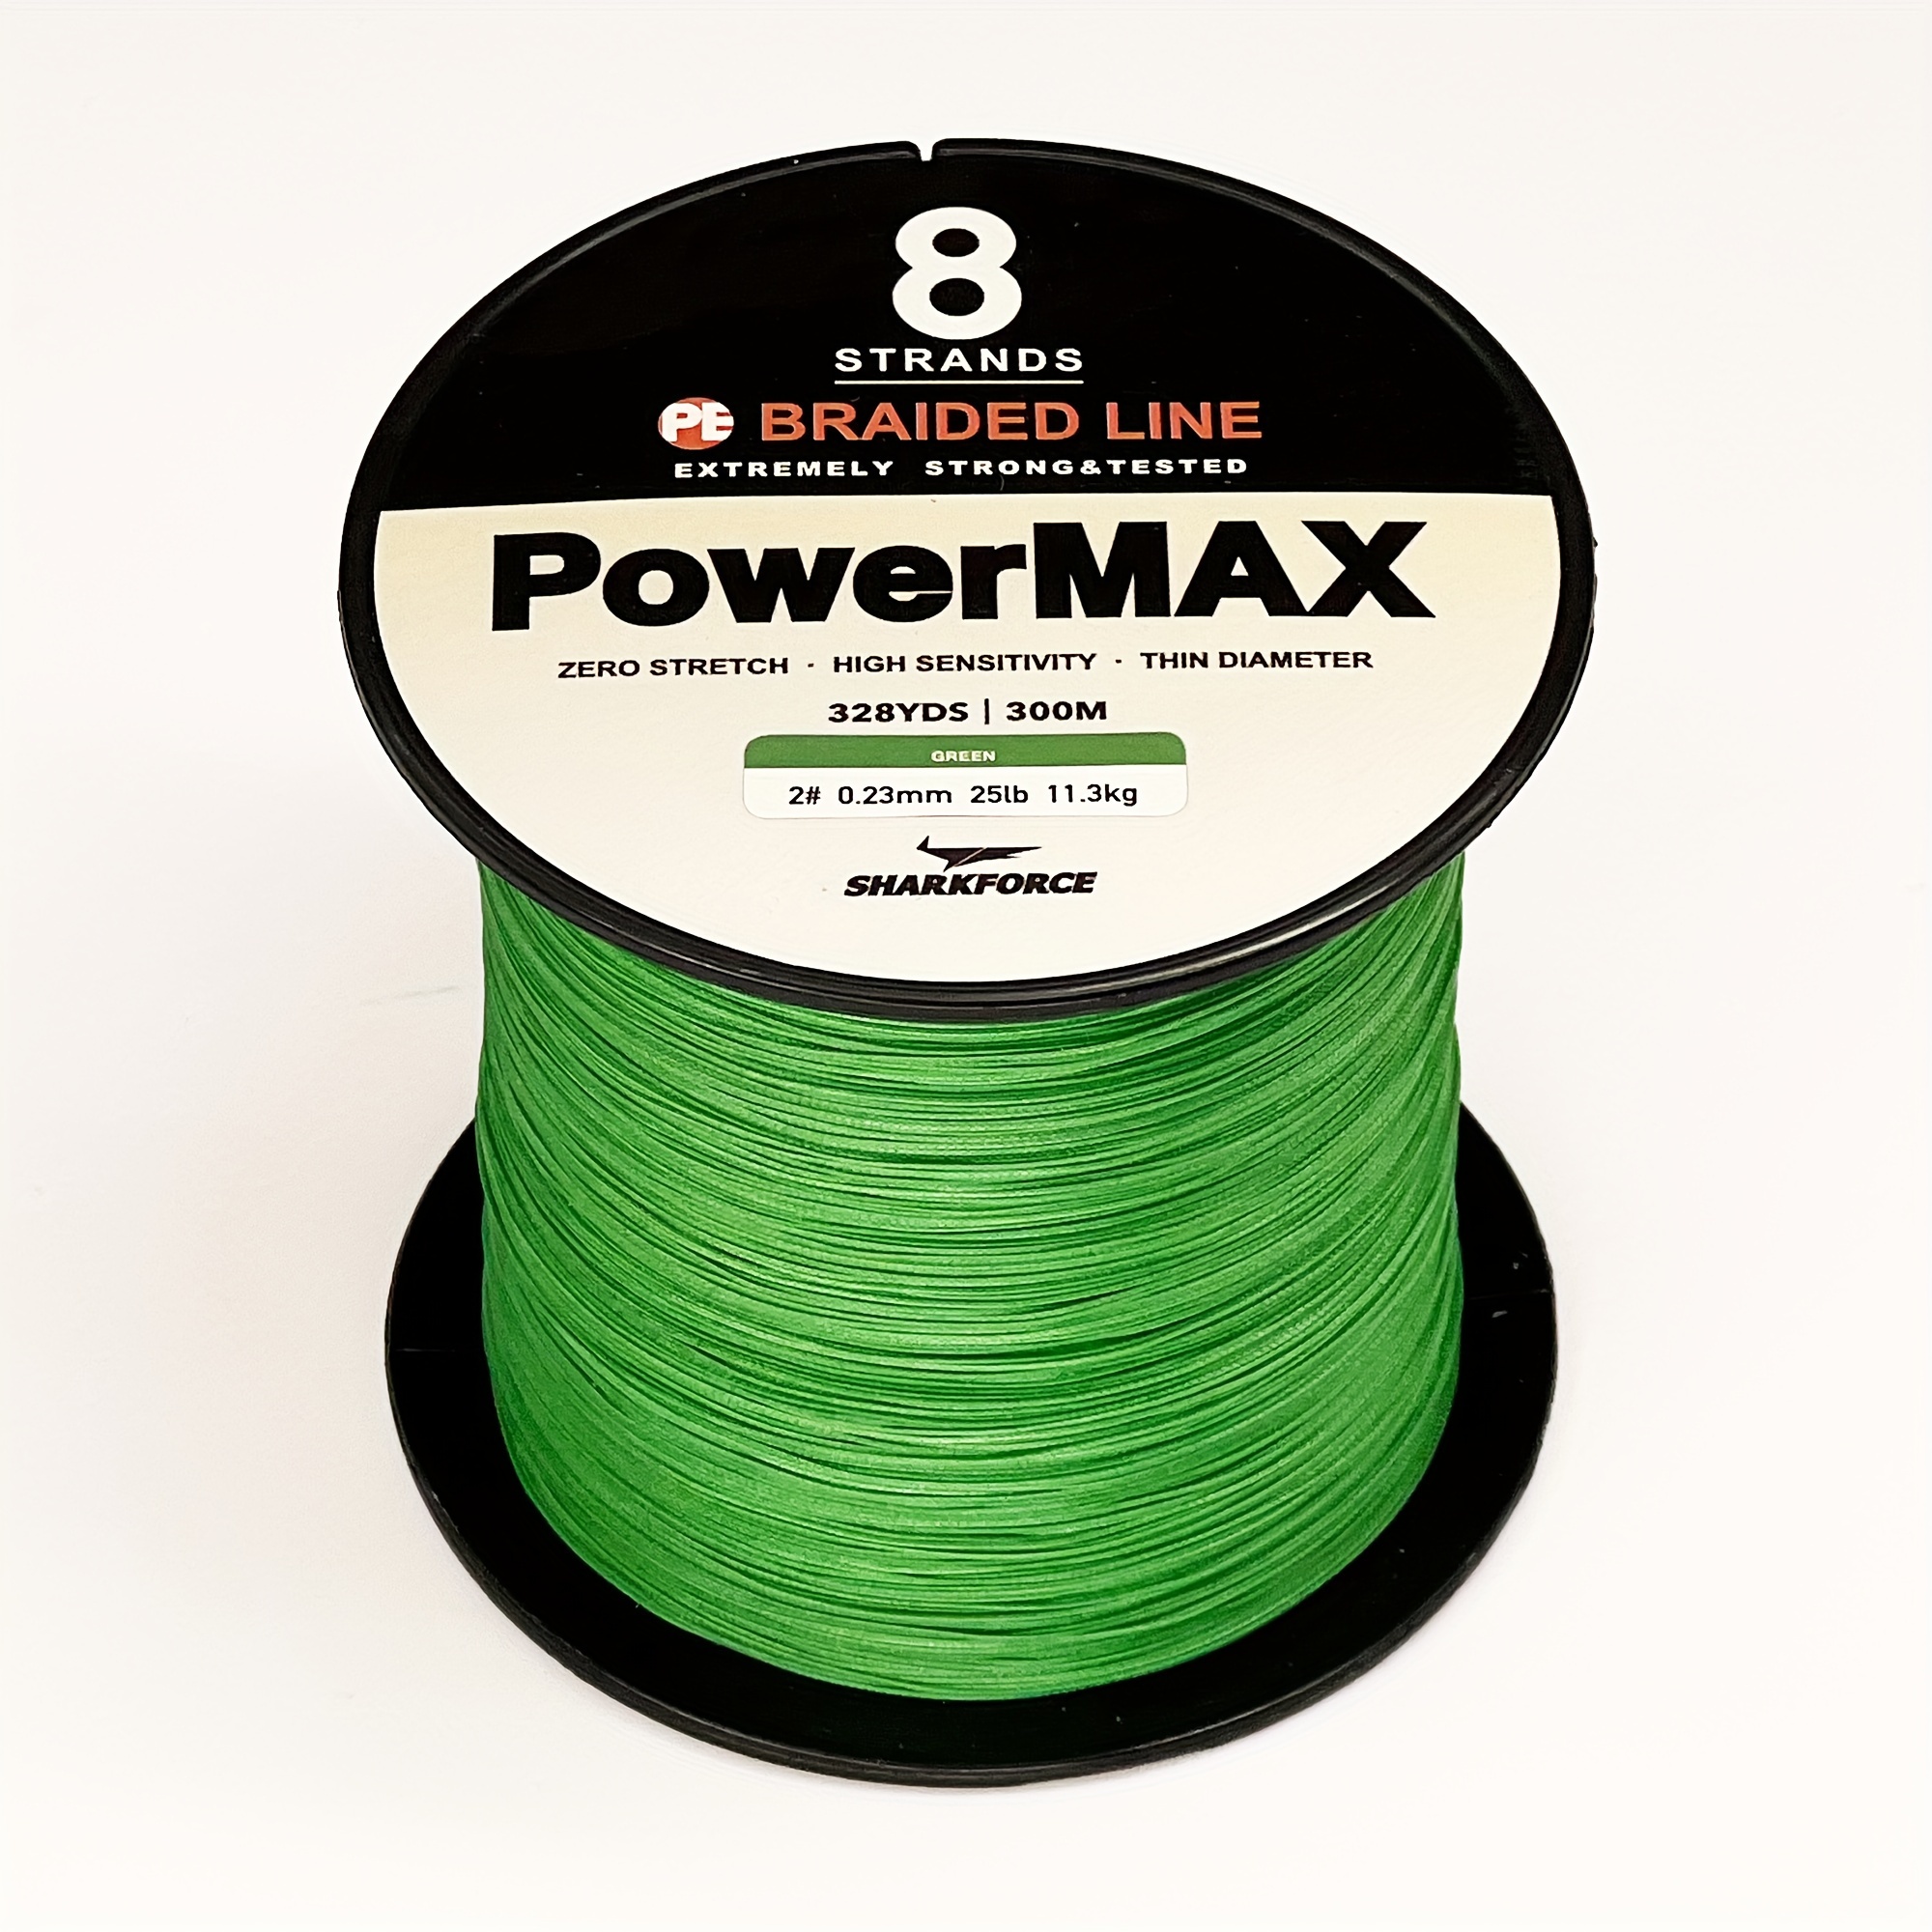 300M Super Strong Green Multifilament Braided Fishing Line 8